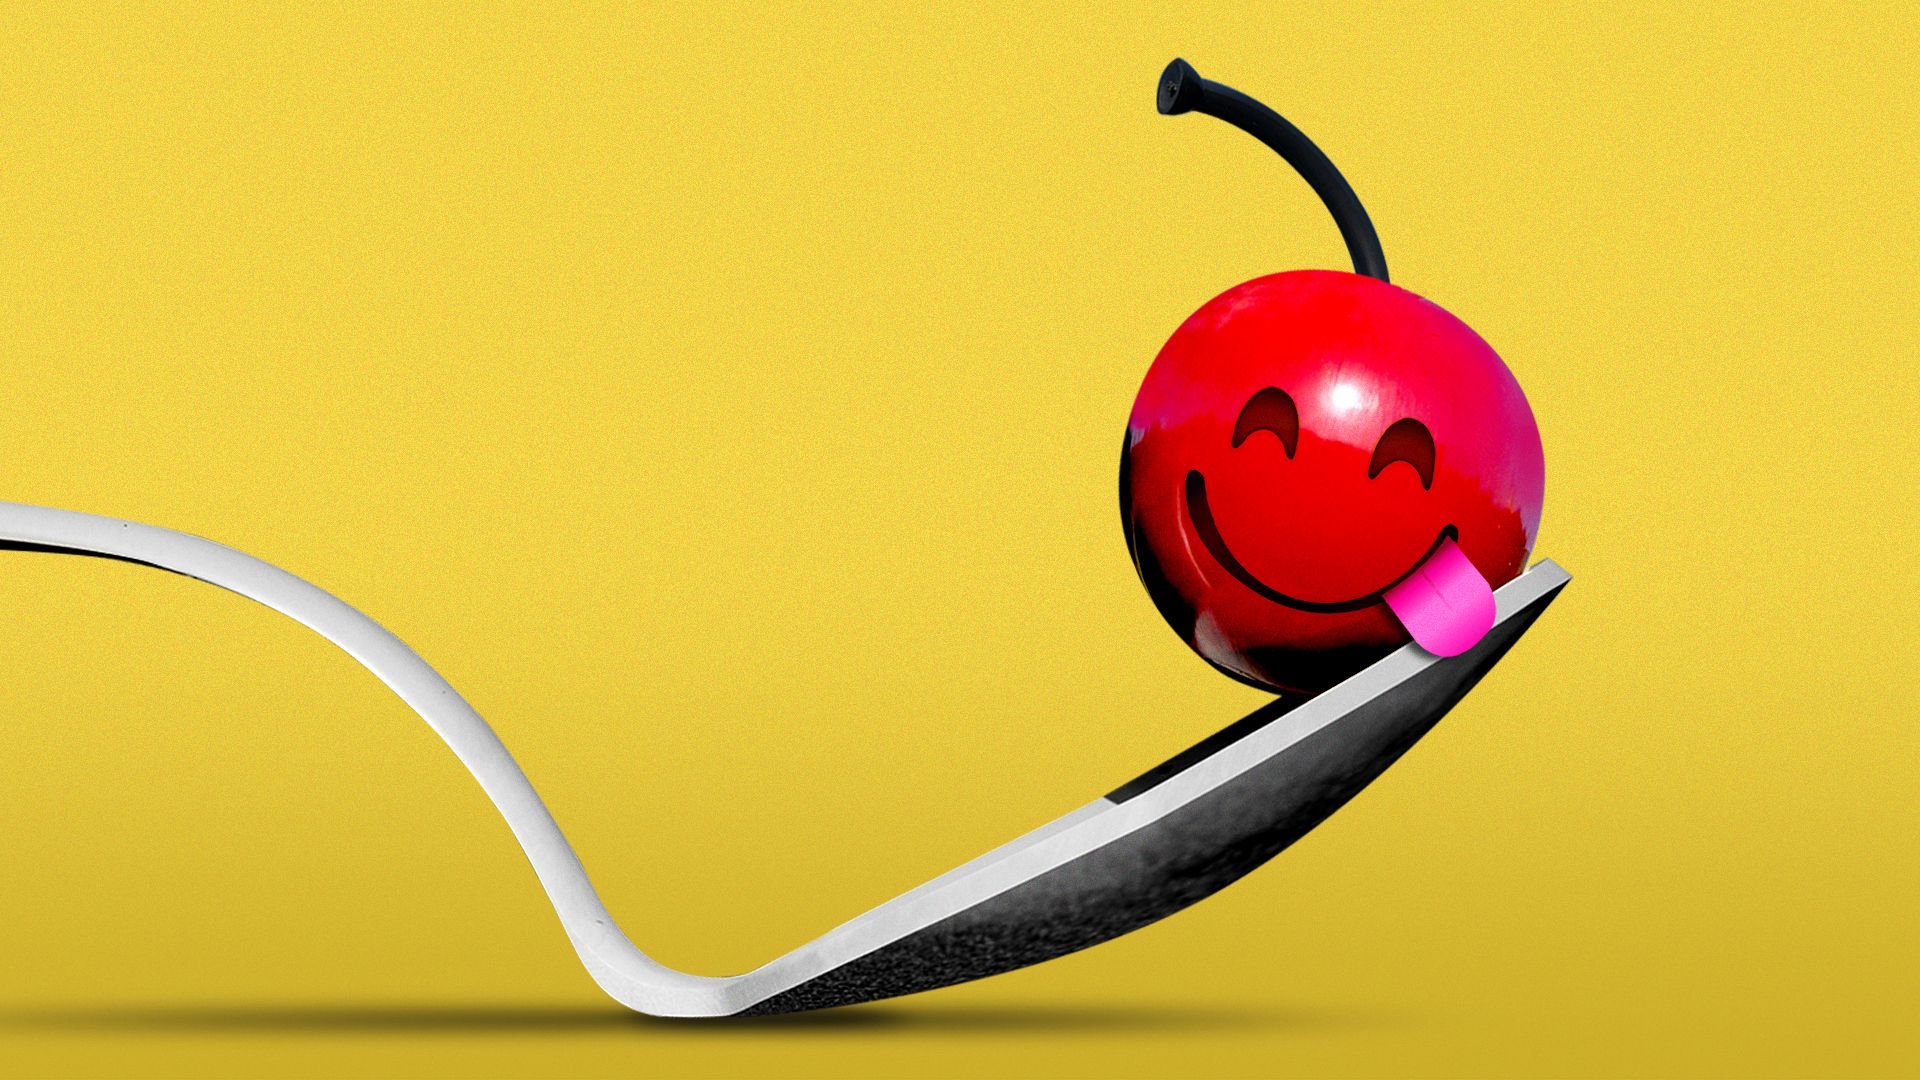 Illustration of the Spoonbridge and Cherry sculpture with a smiling emoji imposed on the cherry.